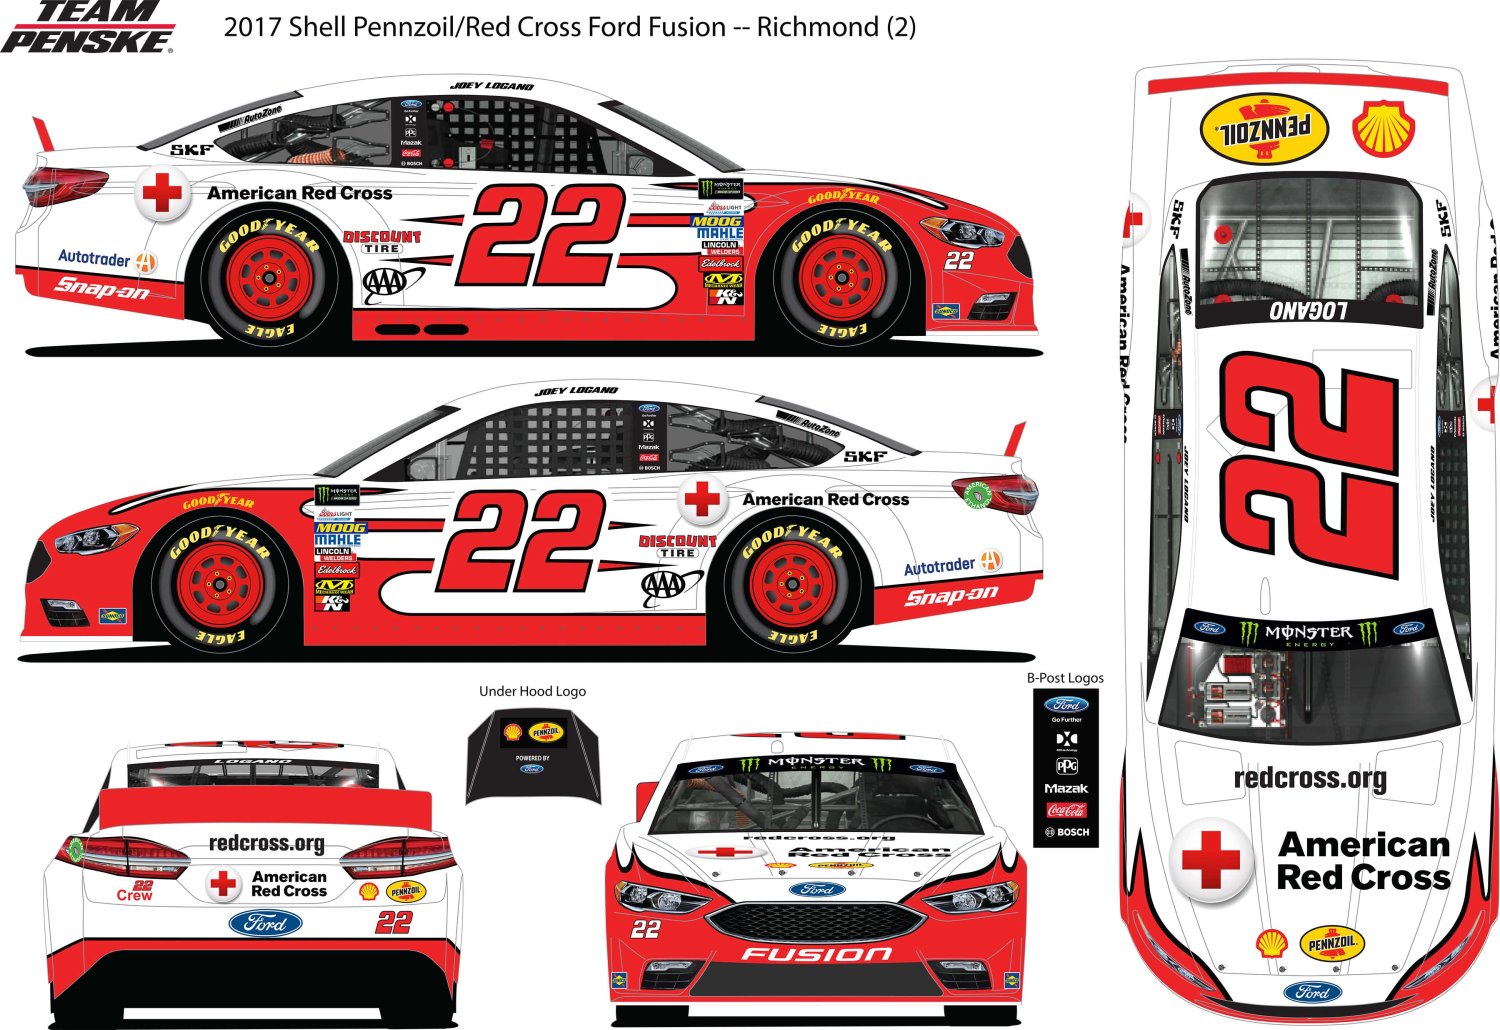 #22 Red Cross Ford